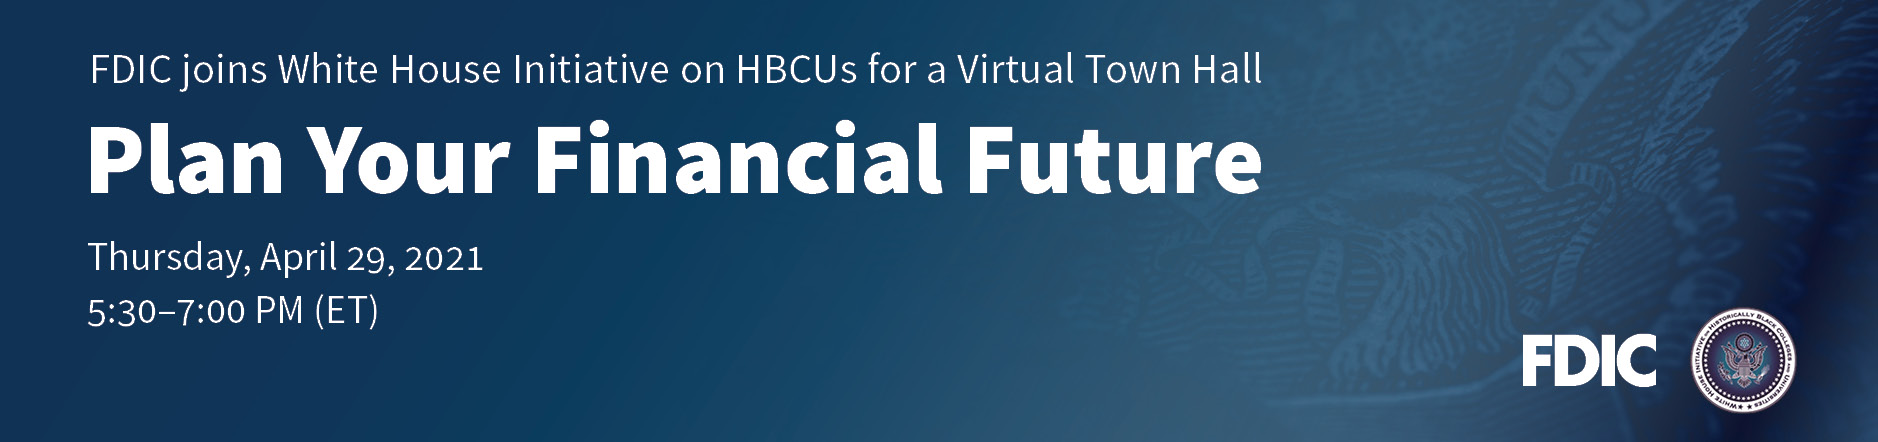 FDIC joins White House Initiative on HBCUs for a Virtual Town Hall: Plan Your Financial Future. Thursday, April 29, 2021 from 5:30 to 7:00 P.M. (ET)